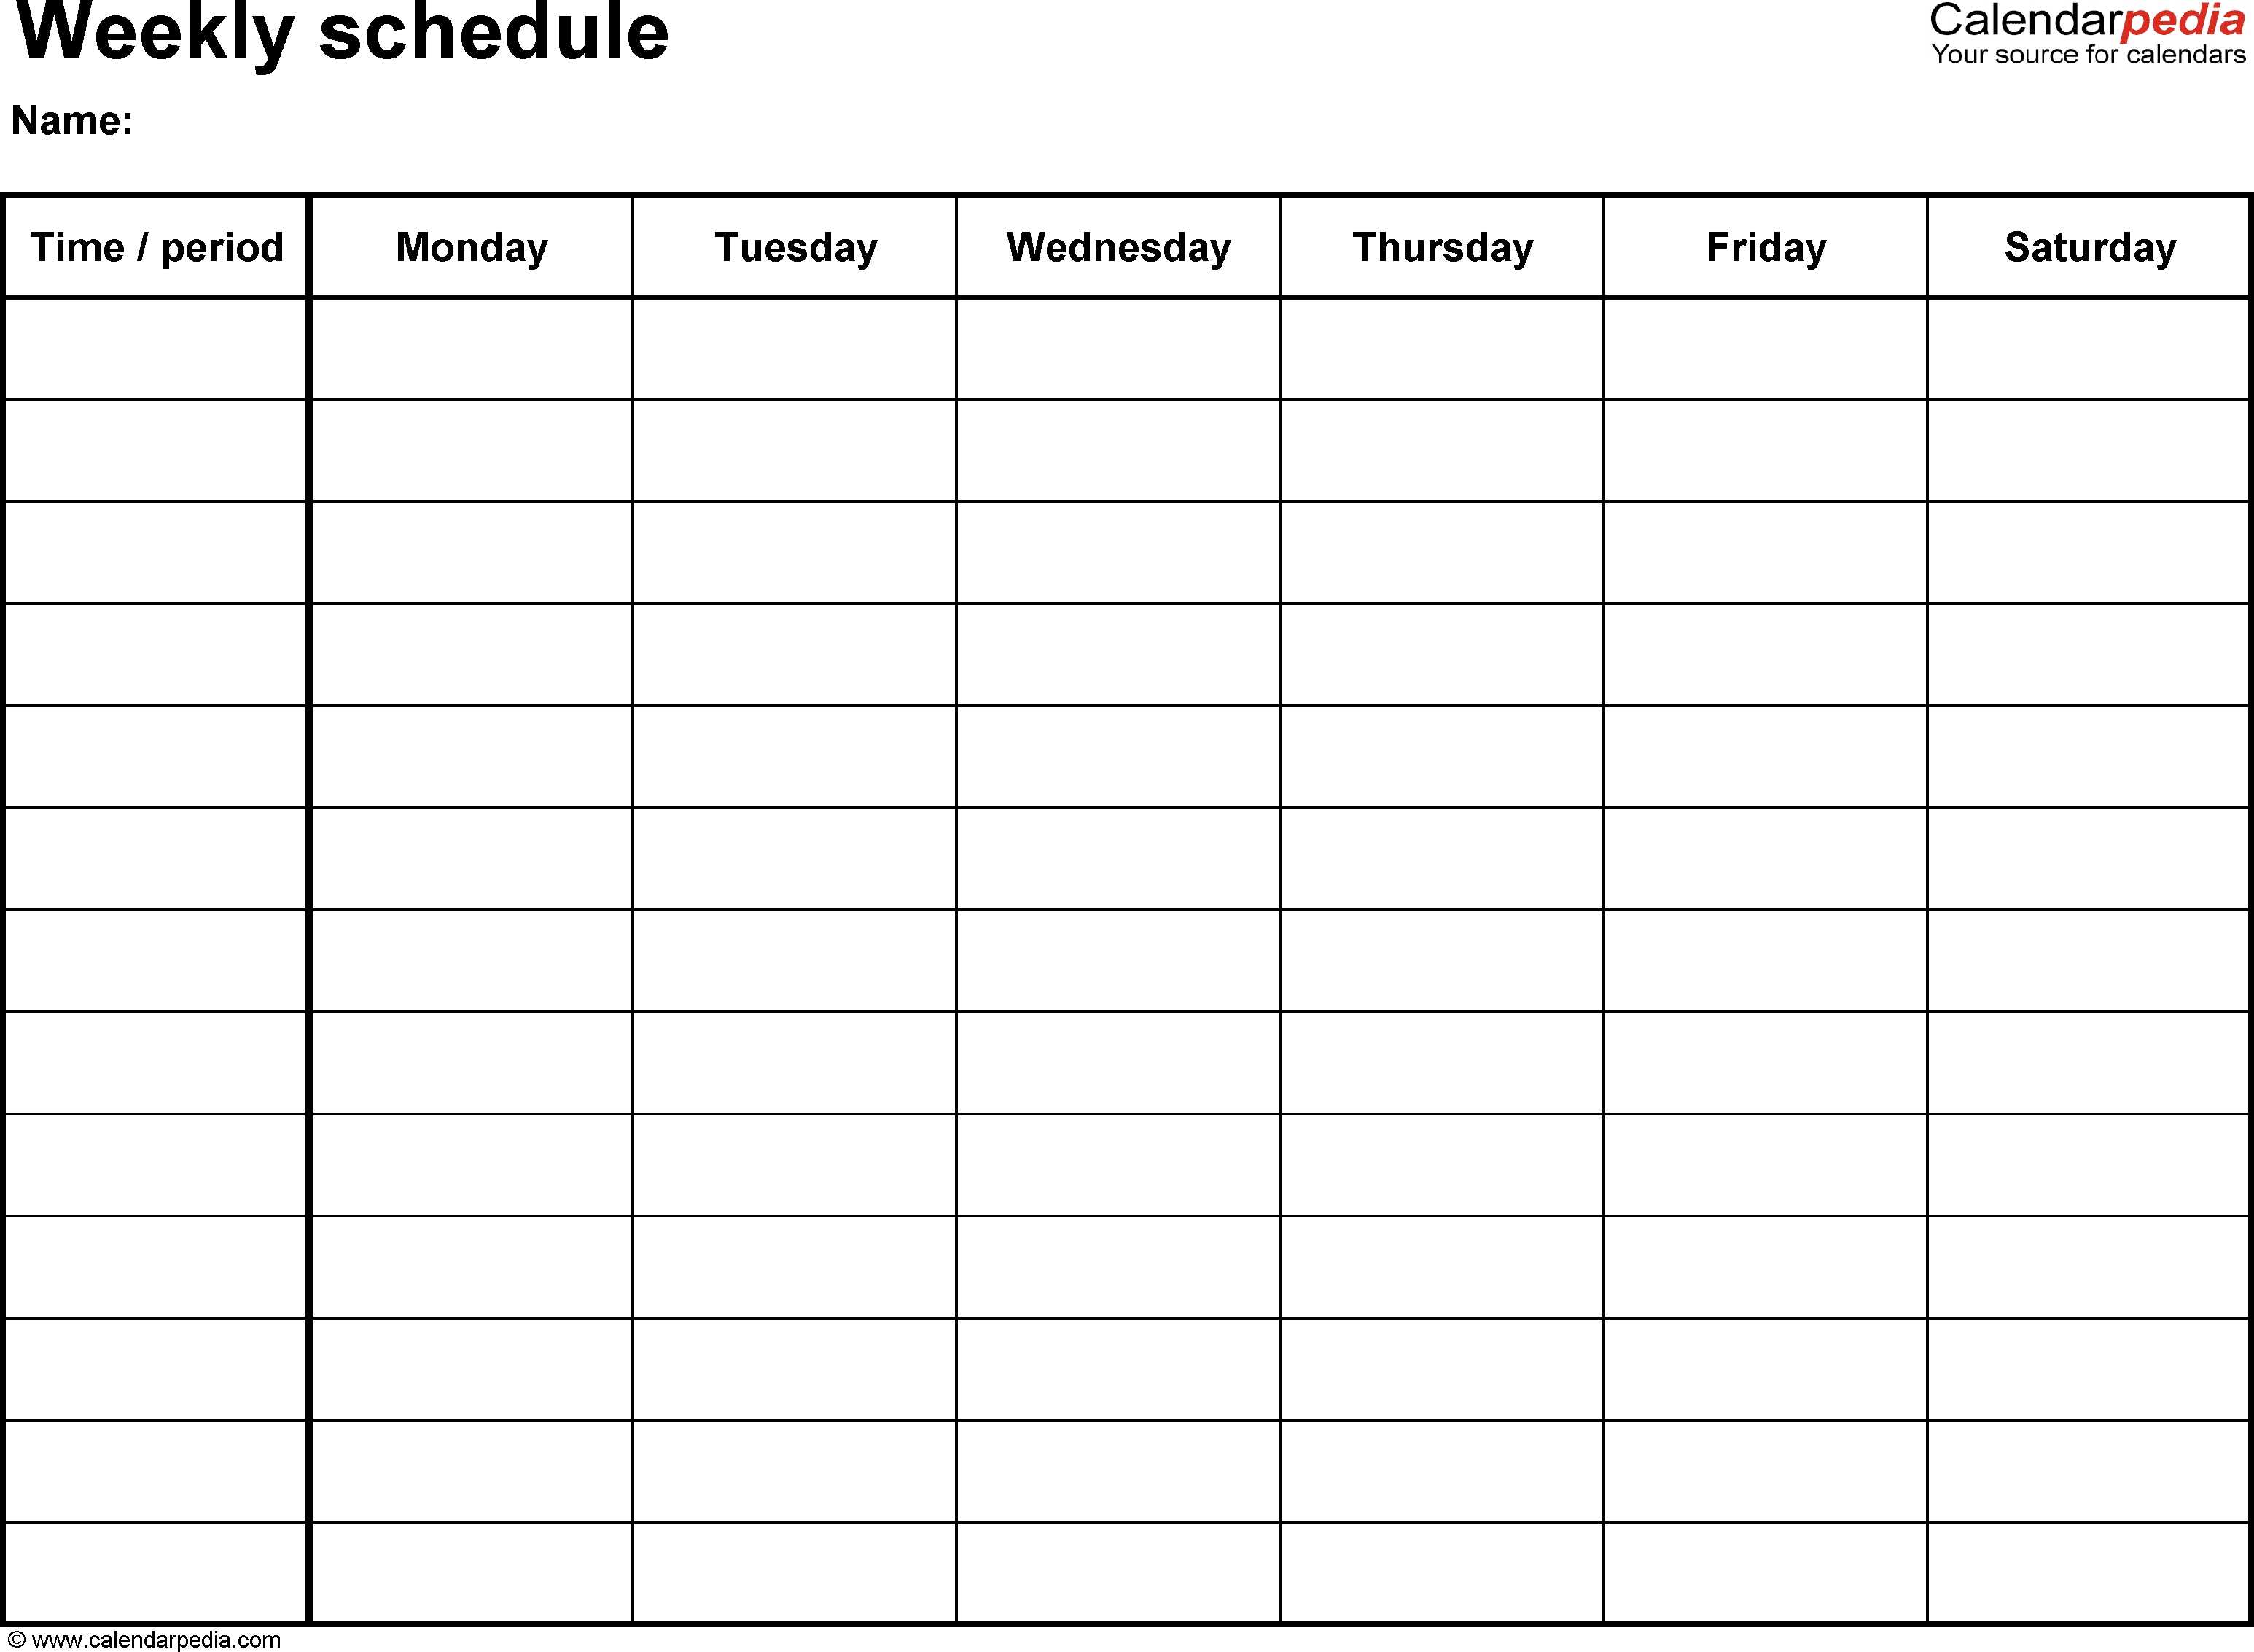 Free Weekly Schedule Templates For Word - 18 Templates regarding 7 Day Employee Schedule Template